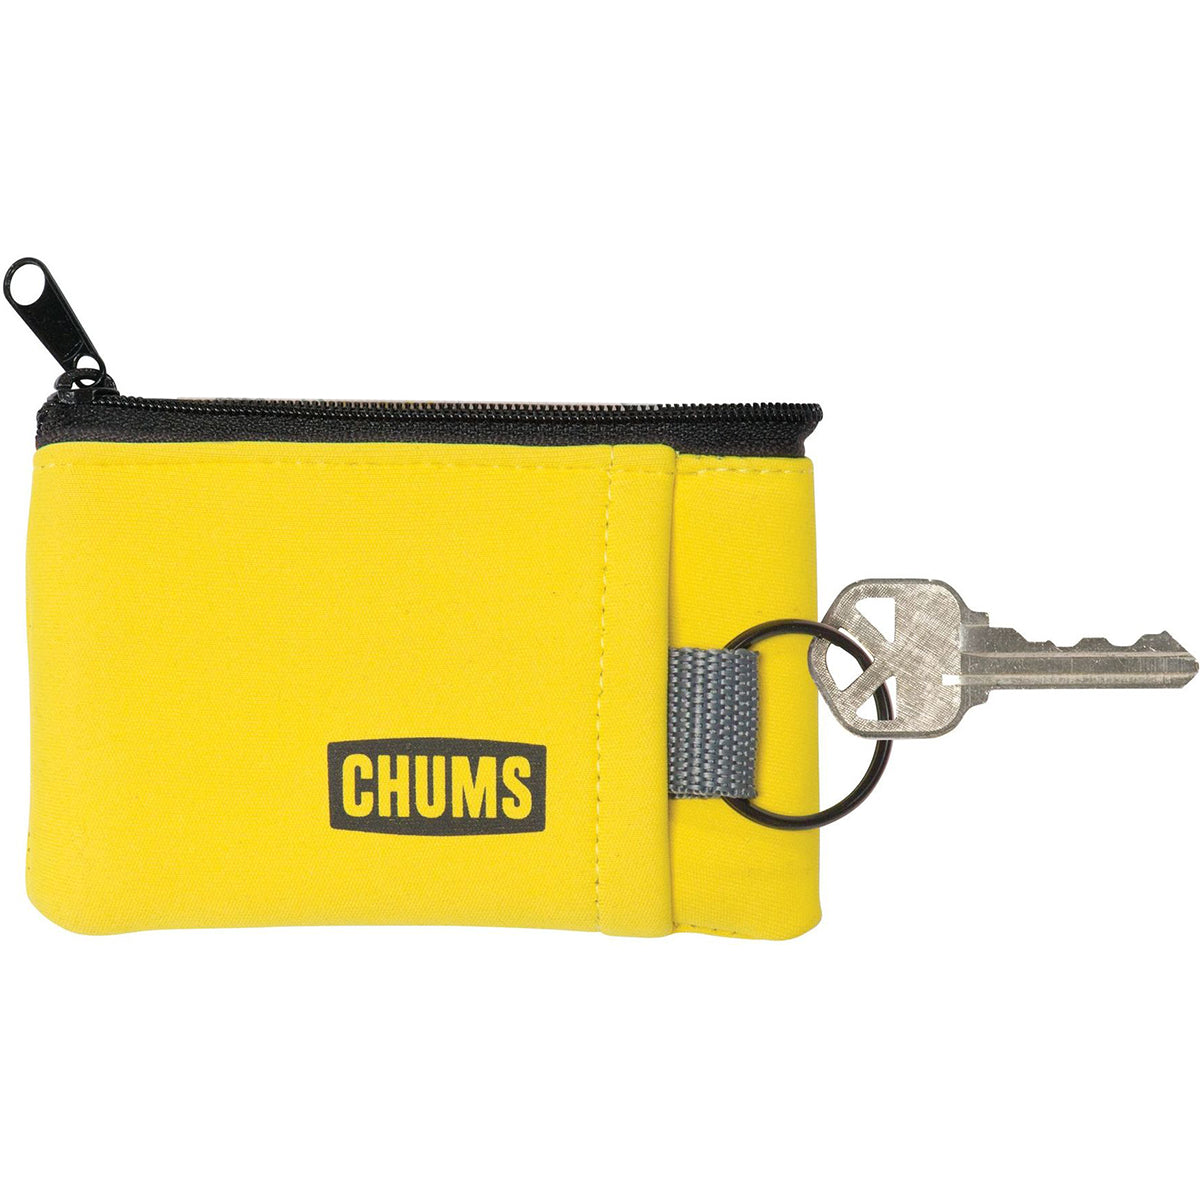 Chums Floating Marsupial Keychain Wallet Chums